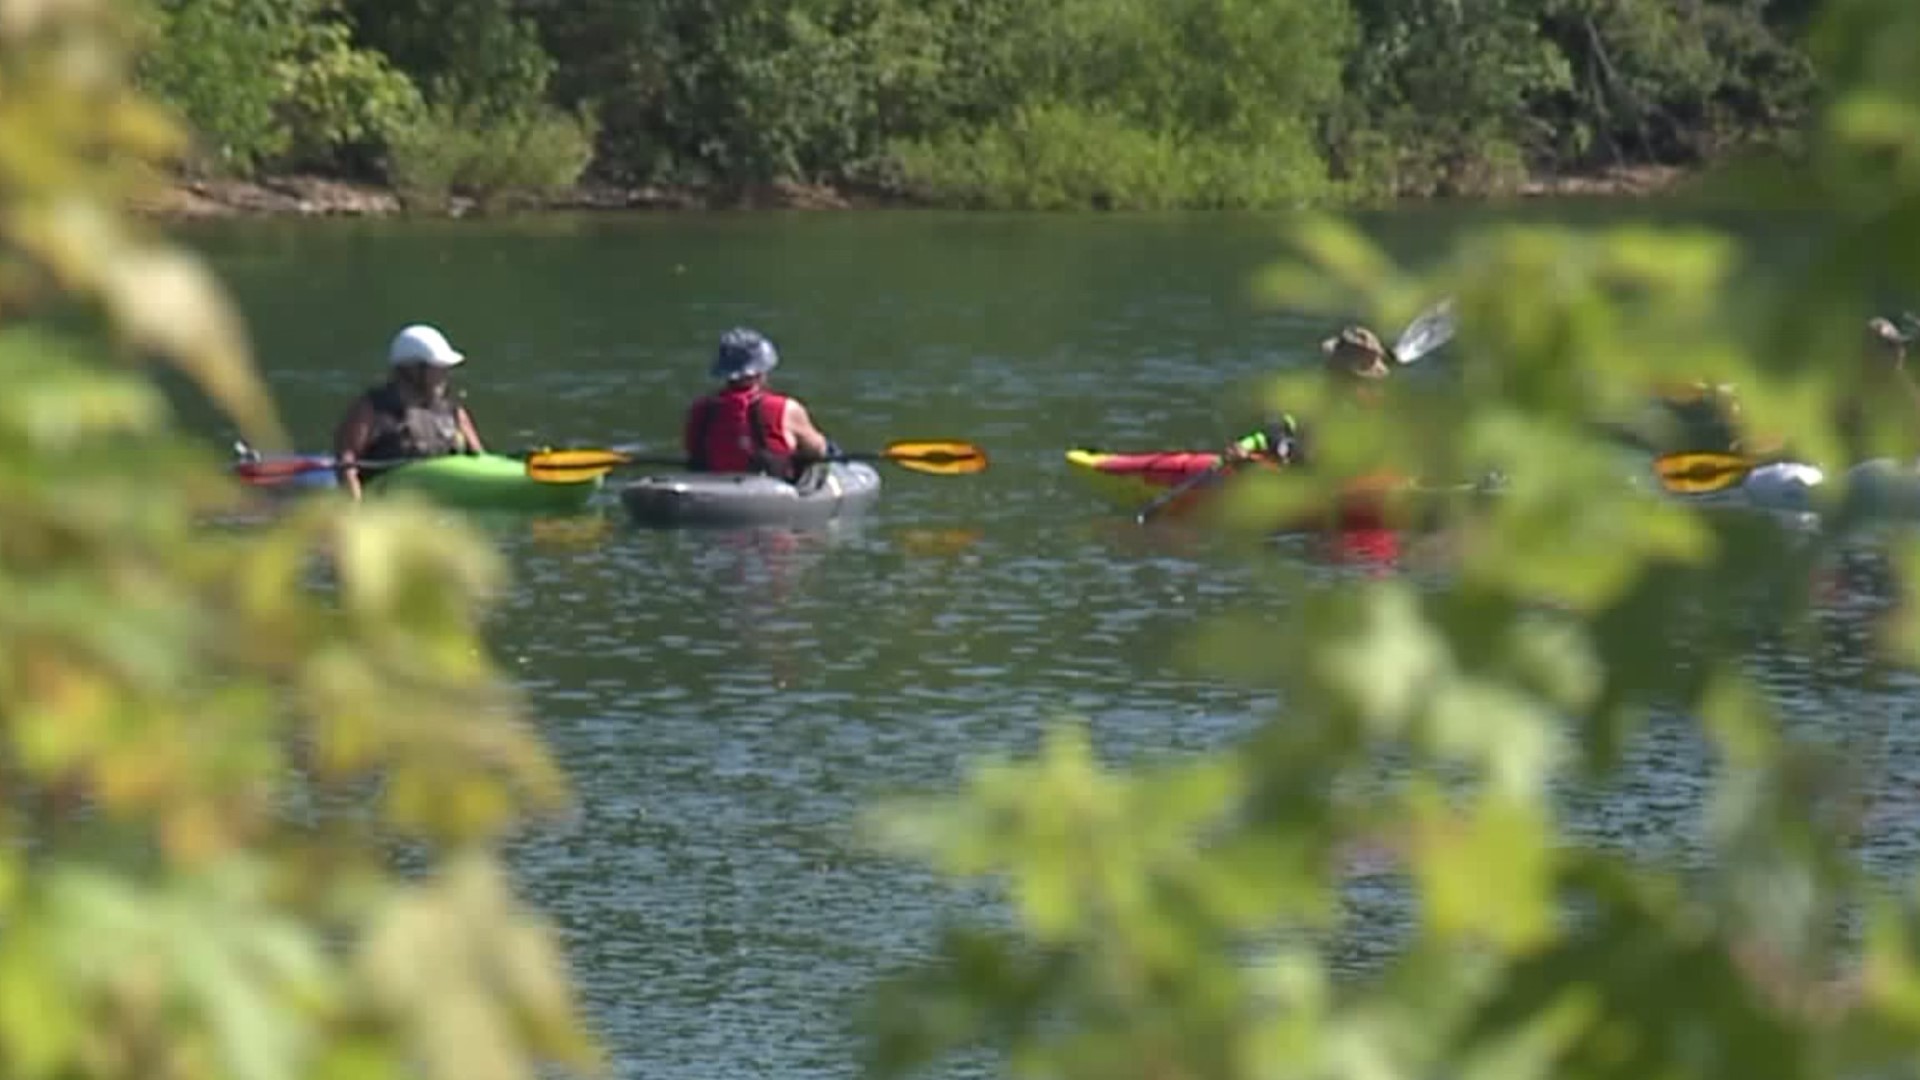 The nonprofit is looking to expand river access for Pennsylvanians with disabilities by creating accessible launches.